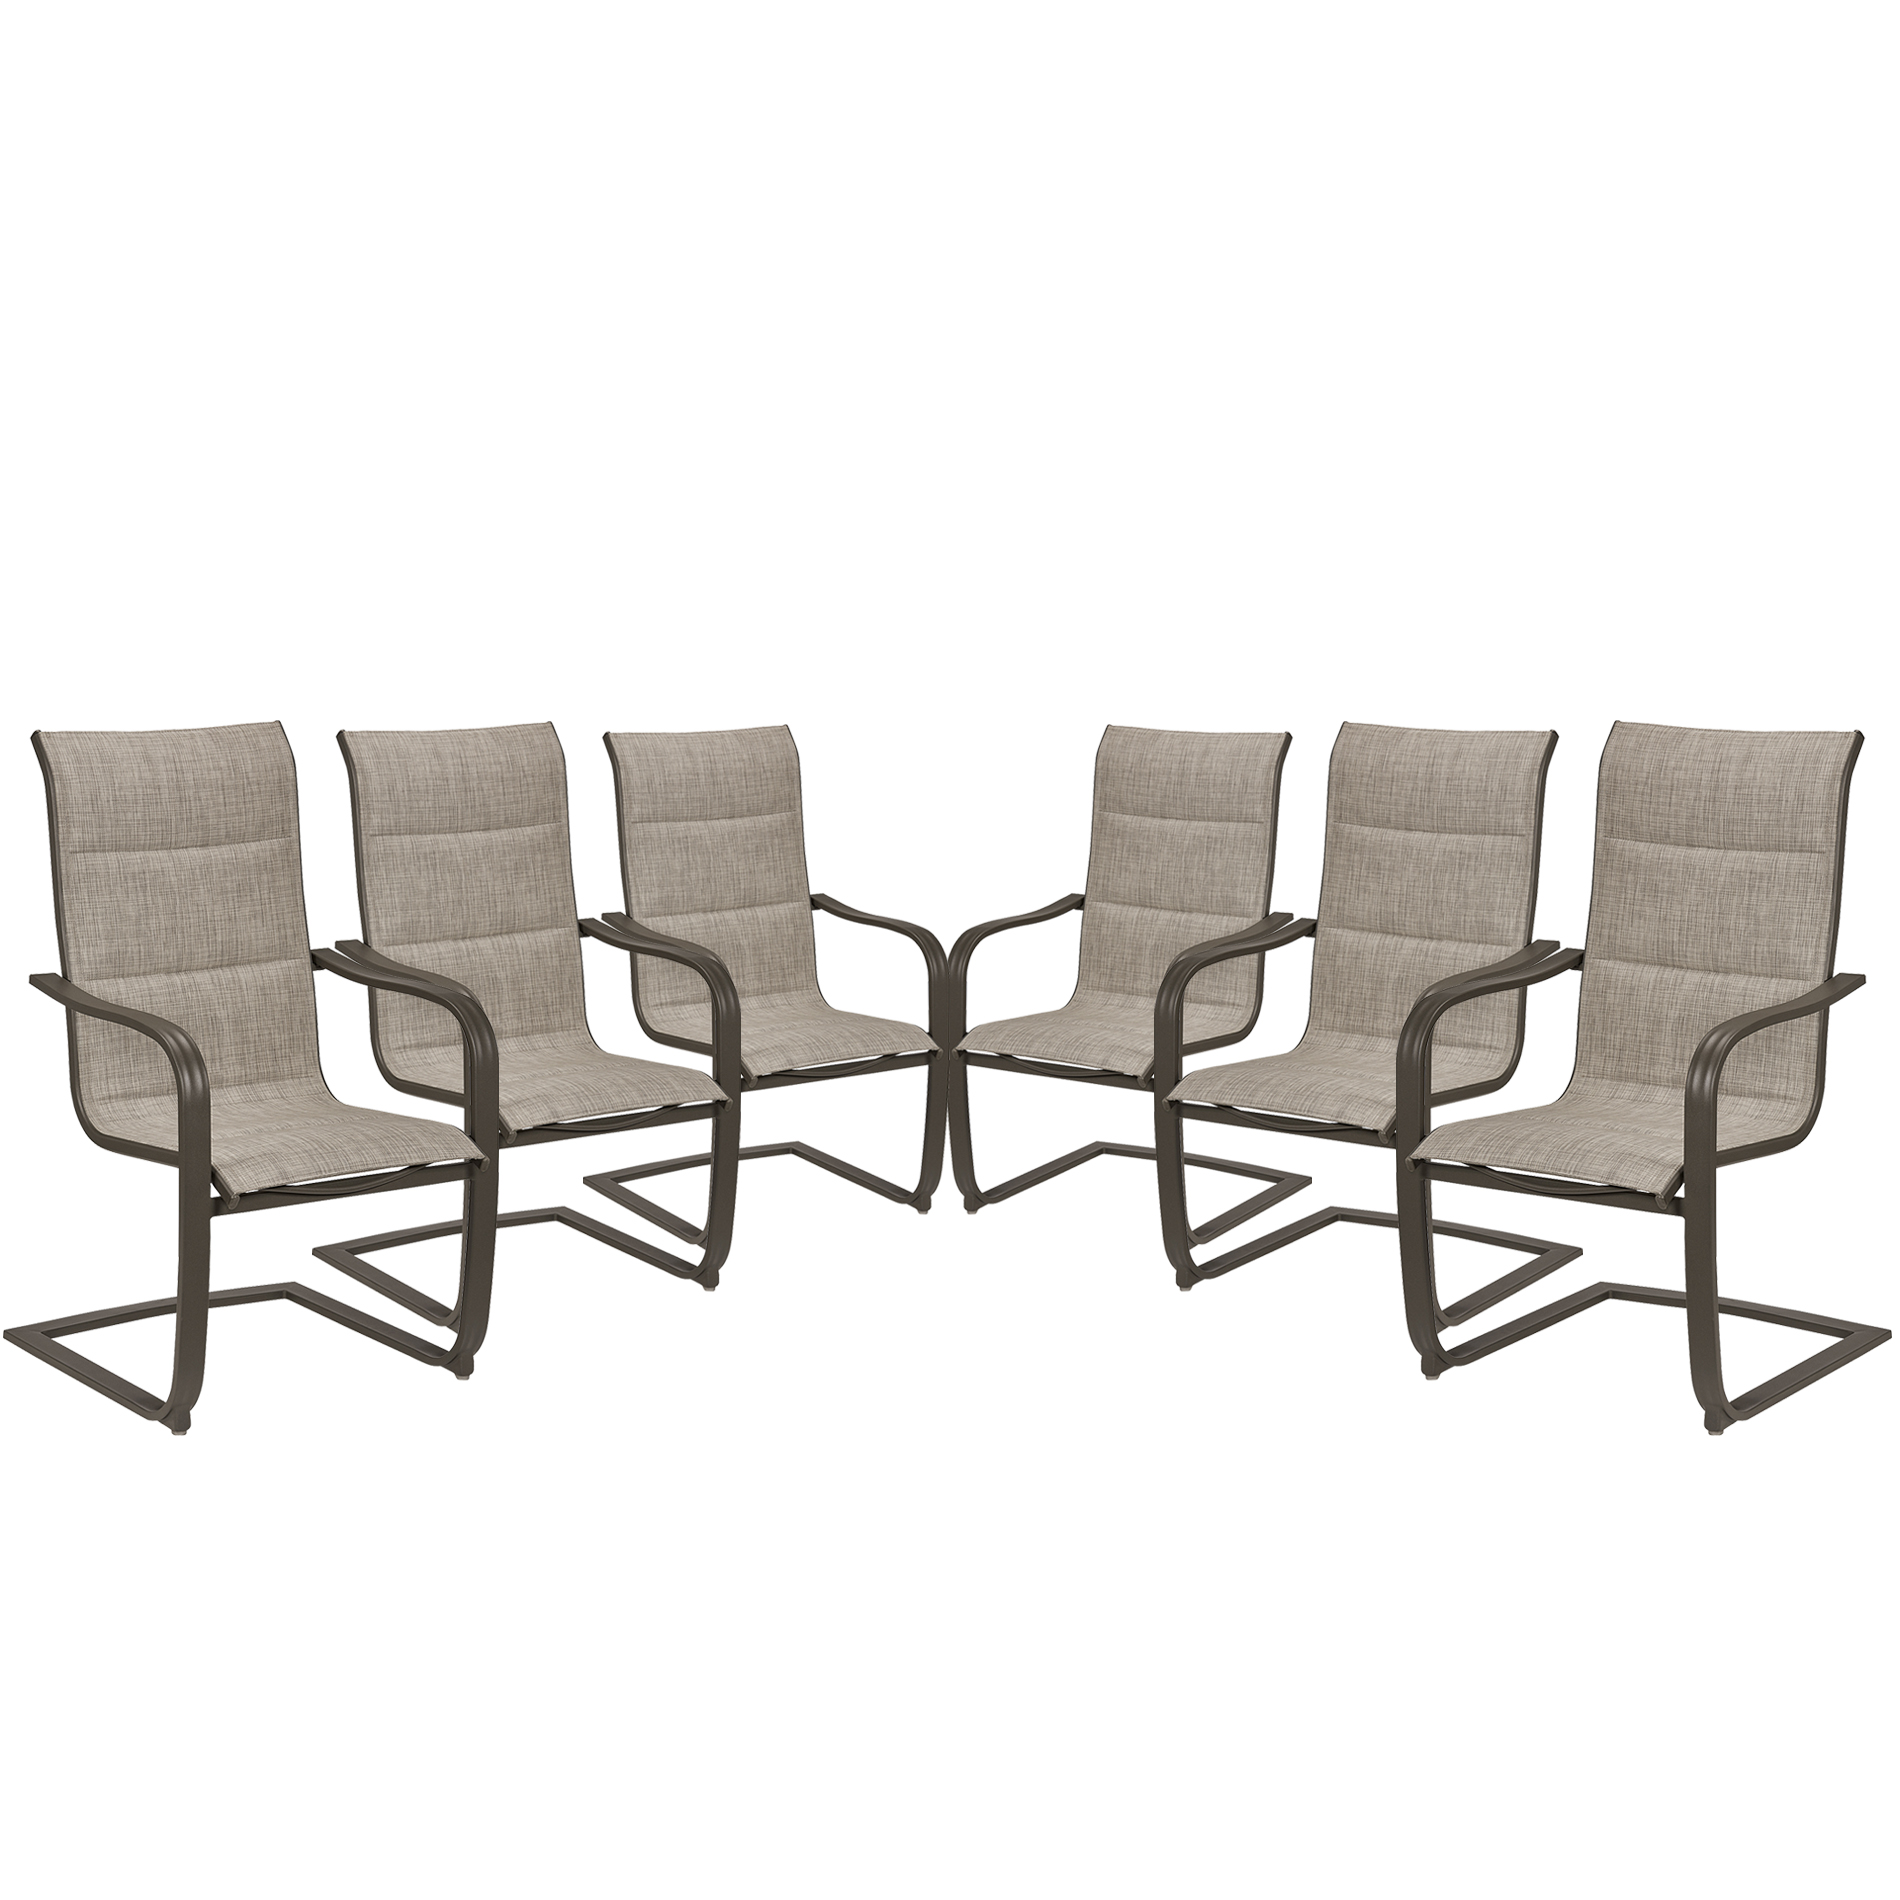 Sutton Rowe Garden City 6 Patio Dining Chairs *Limited Availability